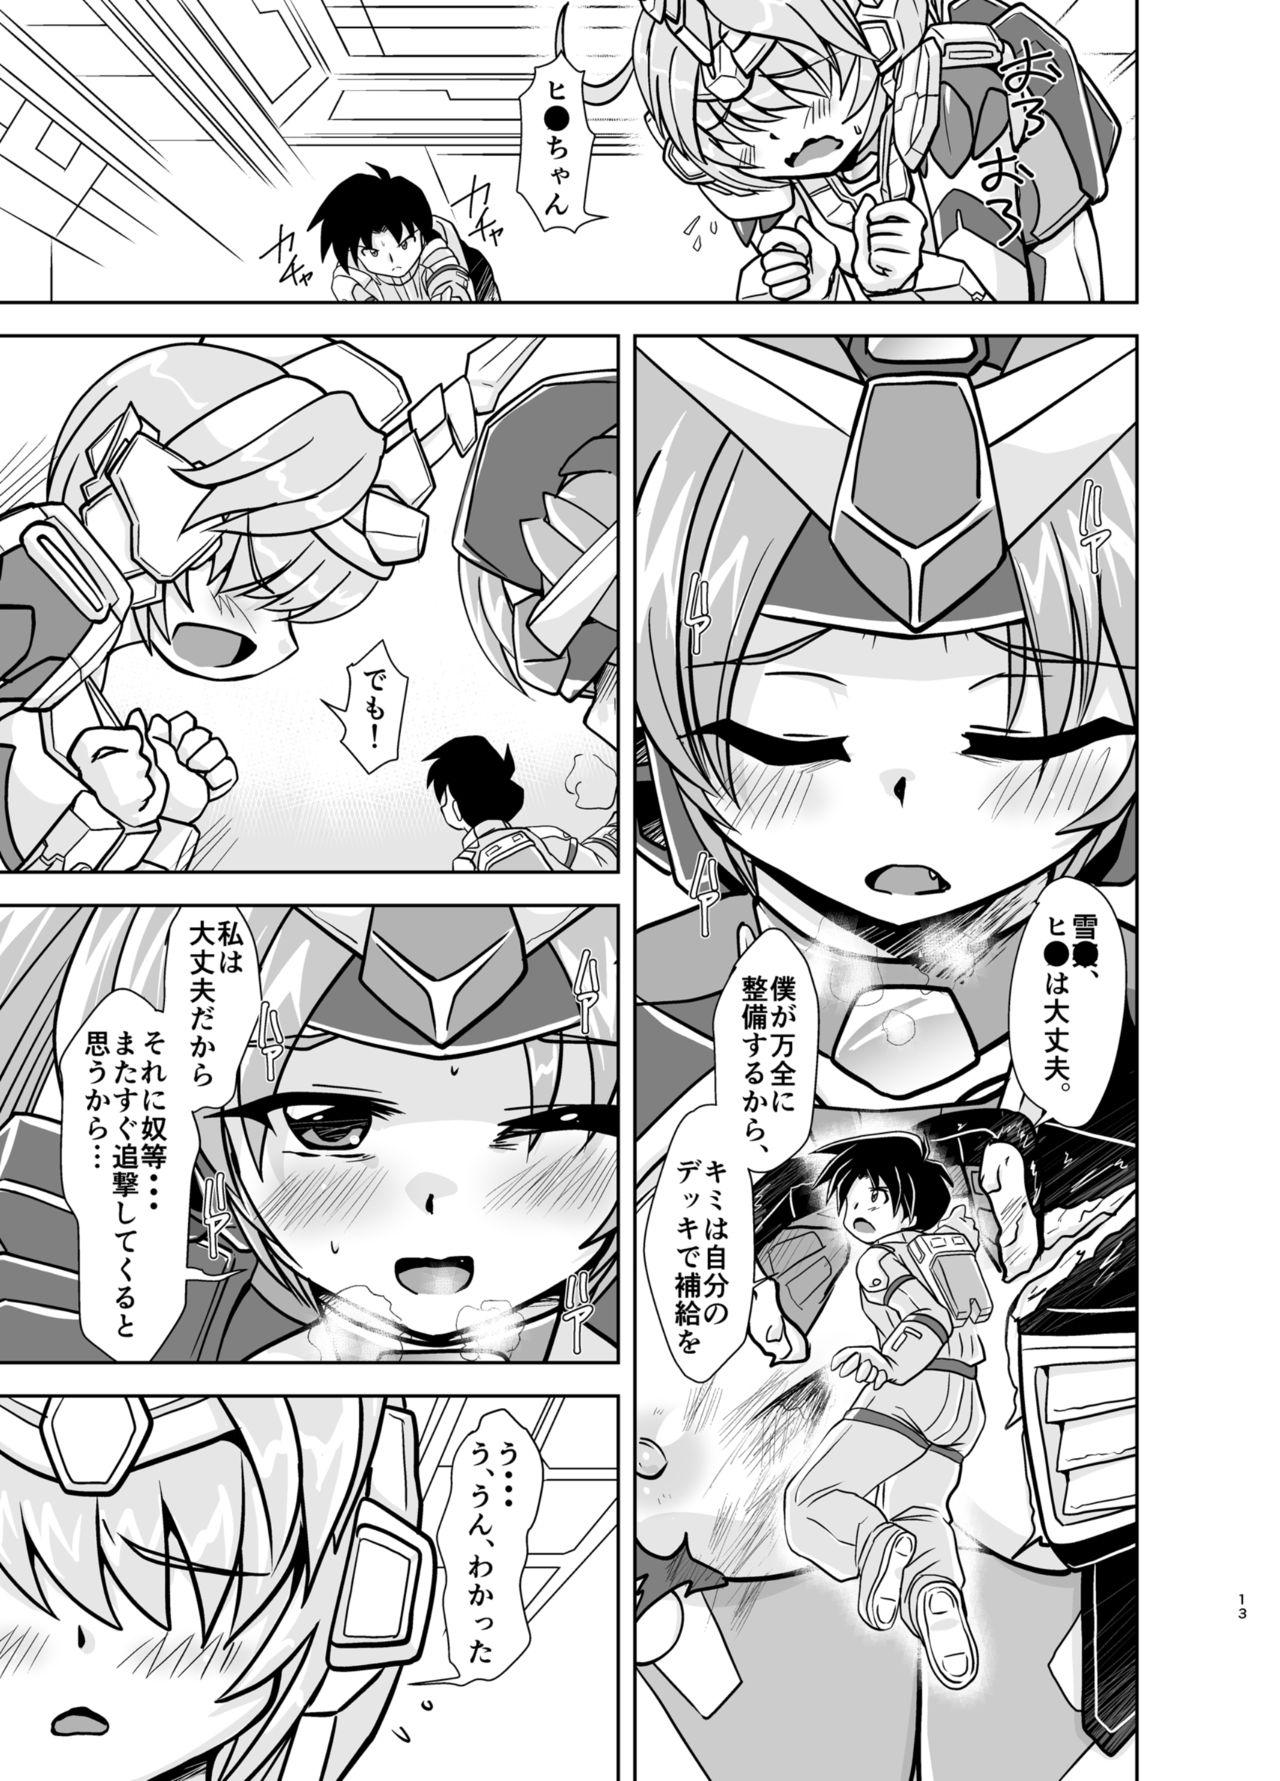 Foreskin GH - Mobile suit gundam Perfect Butt - Page 13